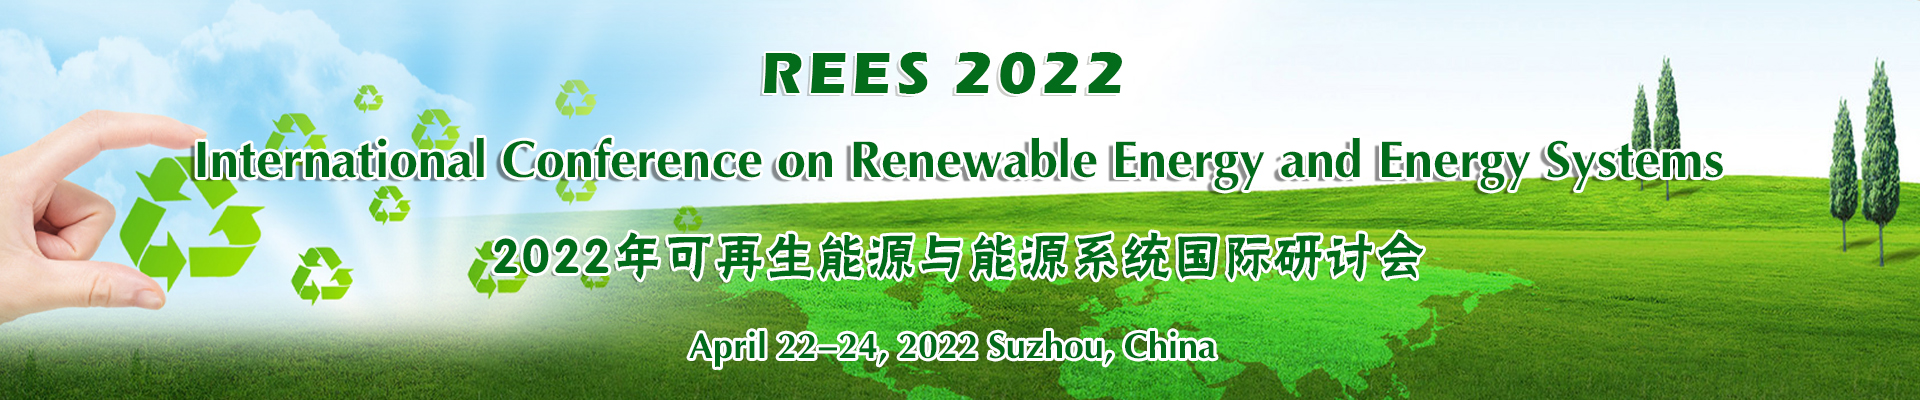 Int'l Conference on Renewable Energy and Energy Systems (REES 2022), Suzhou, Jiangsu, China